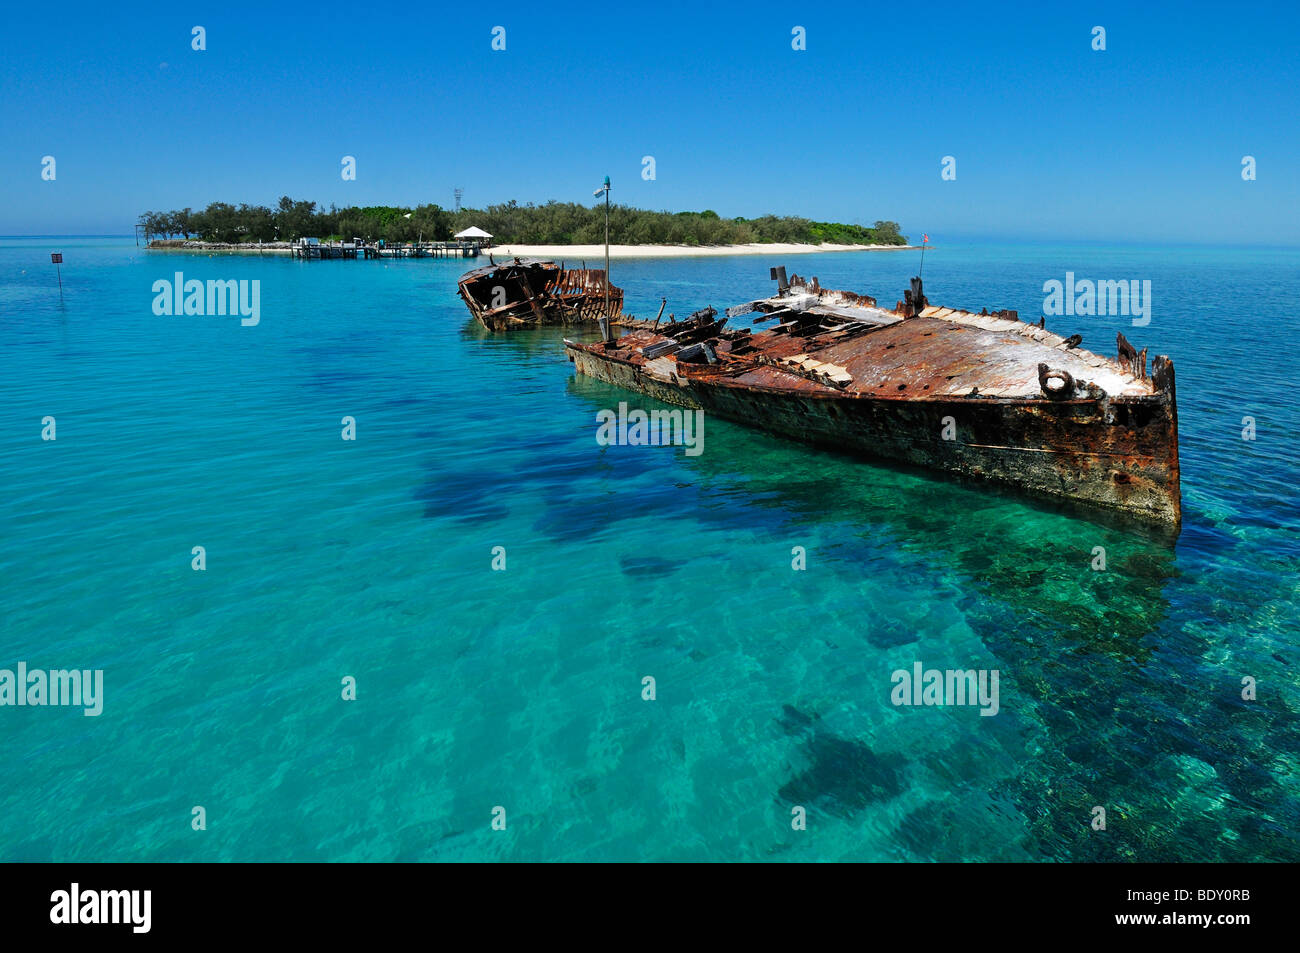 Shipwreck in front of Heron Island, Capricornia Cays National Park, Great Barrier Reef, Queensland, Australia Stock Photo